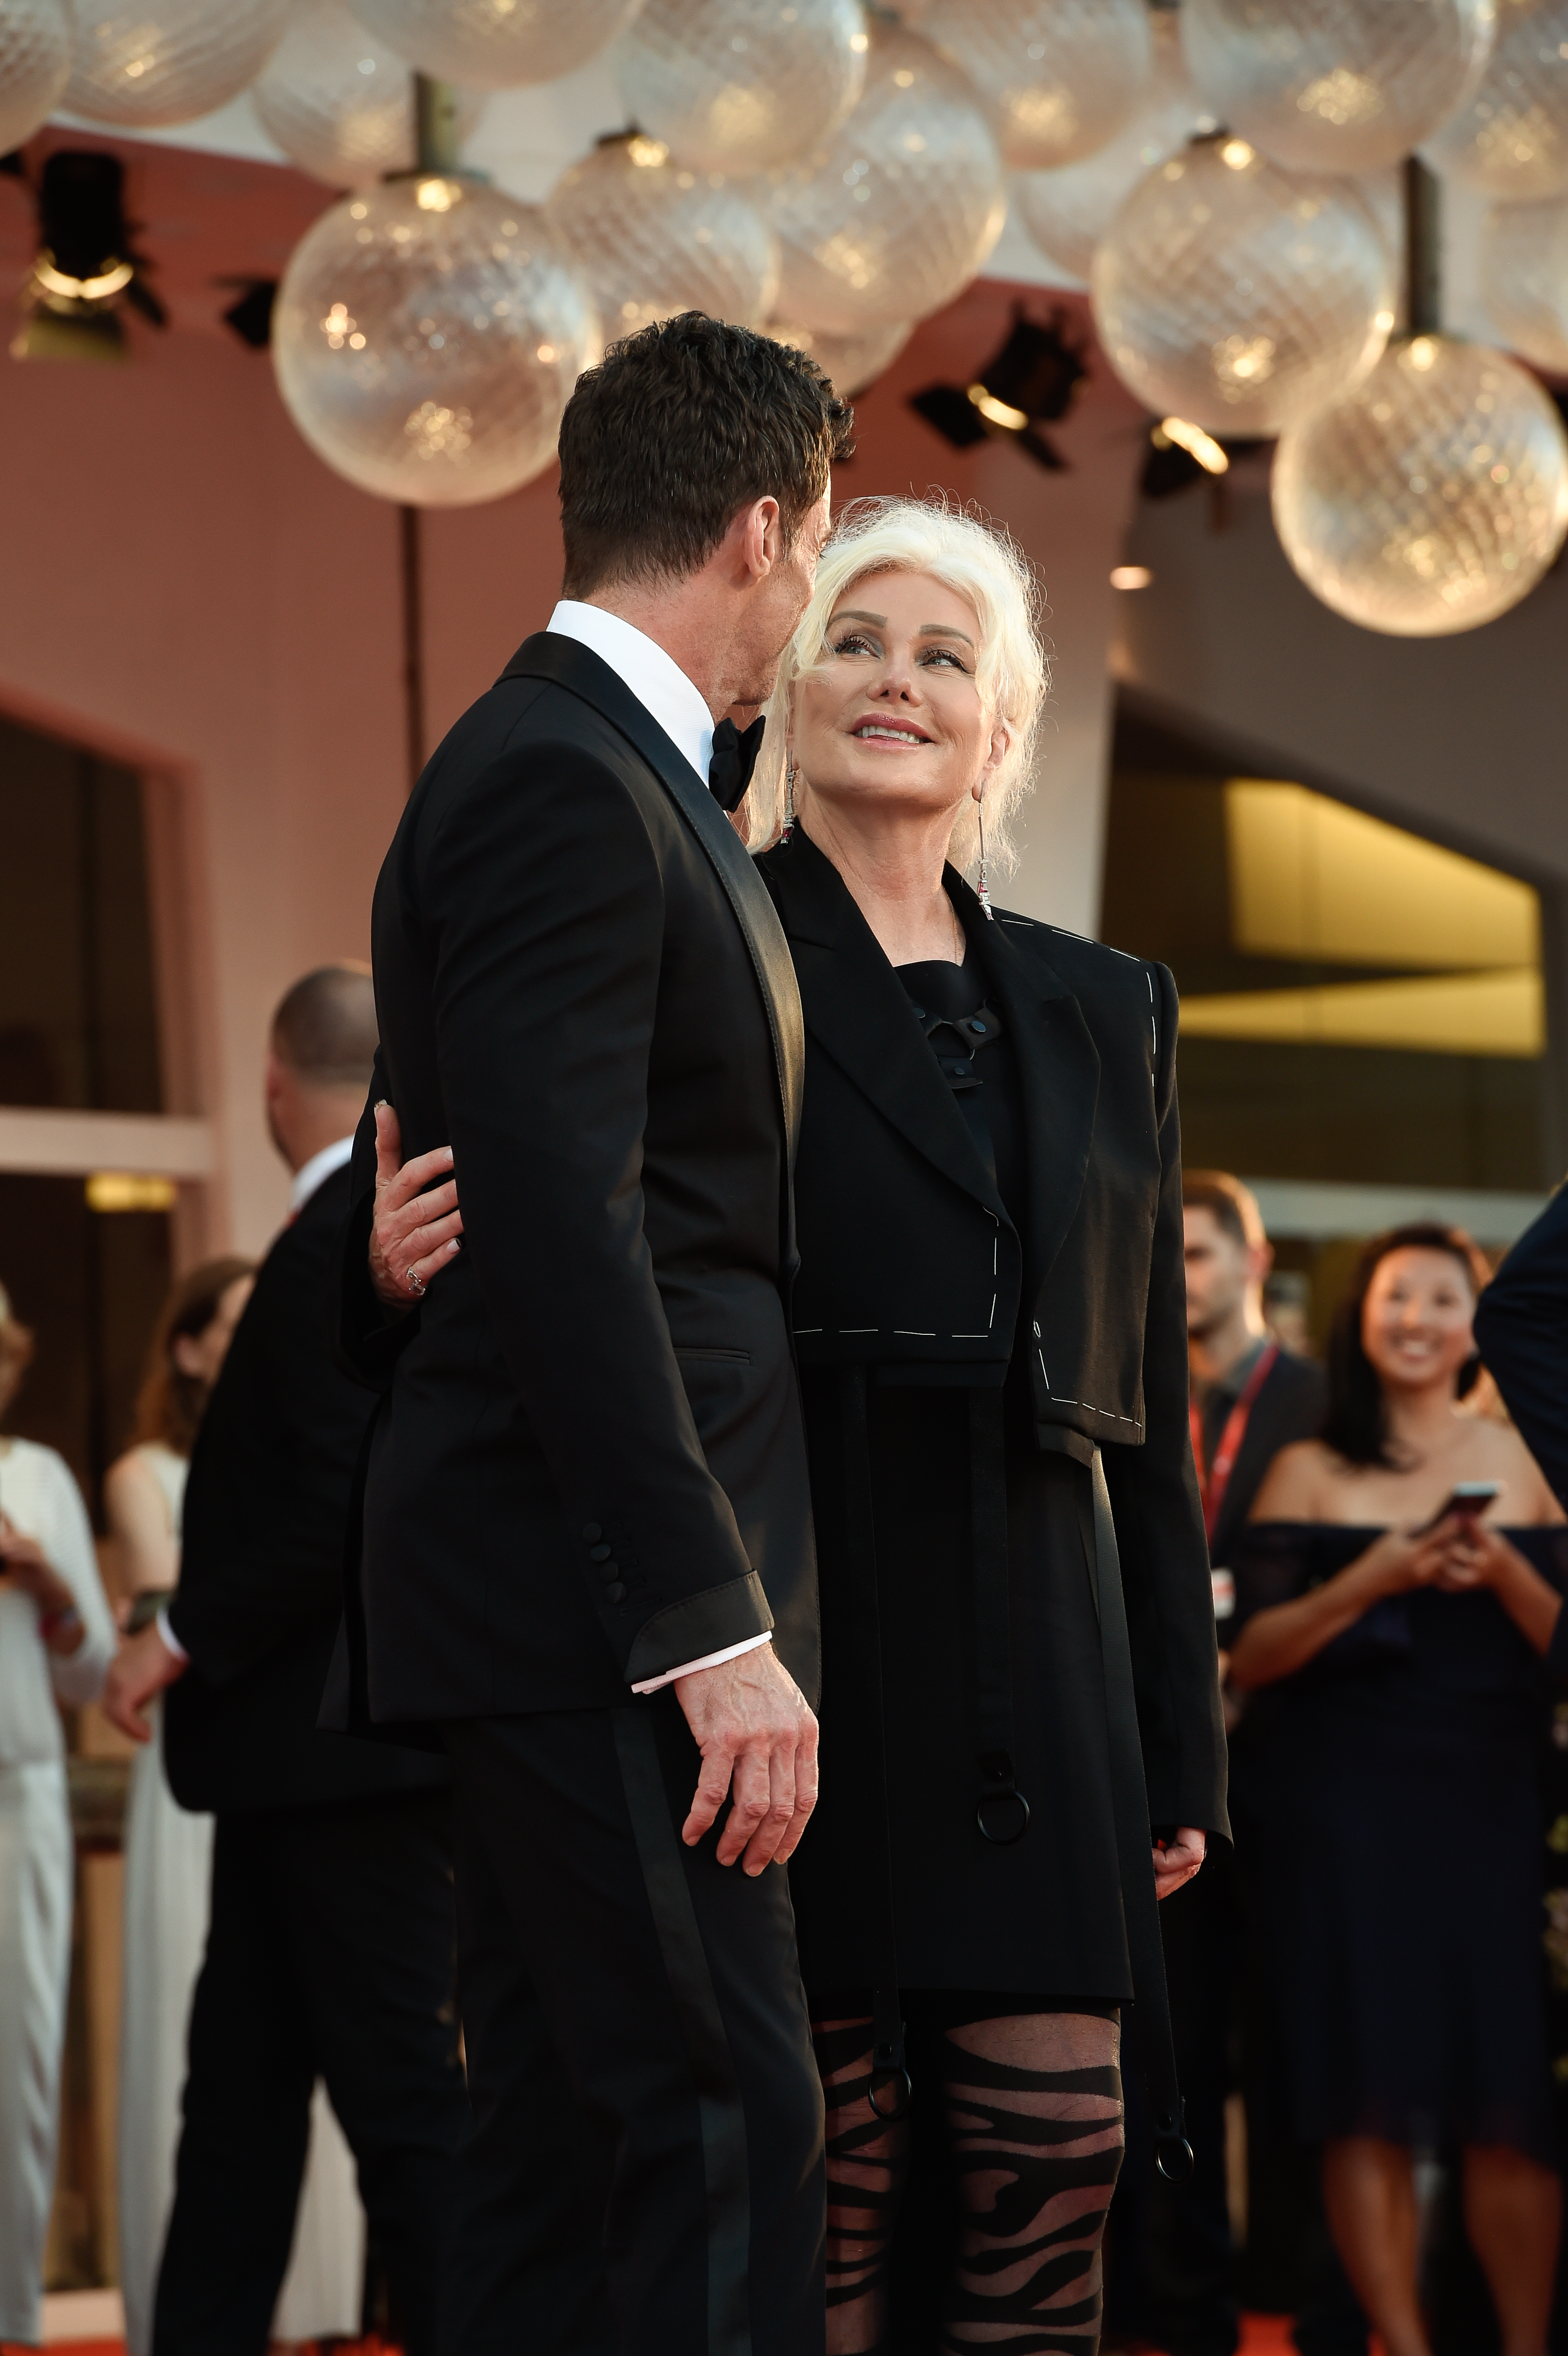 Hugh Jackman and Deborra-Lee Furness at the 79th Venice International Film Festival in Venice 2022 | Source: Getty Images